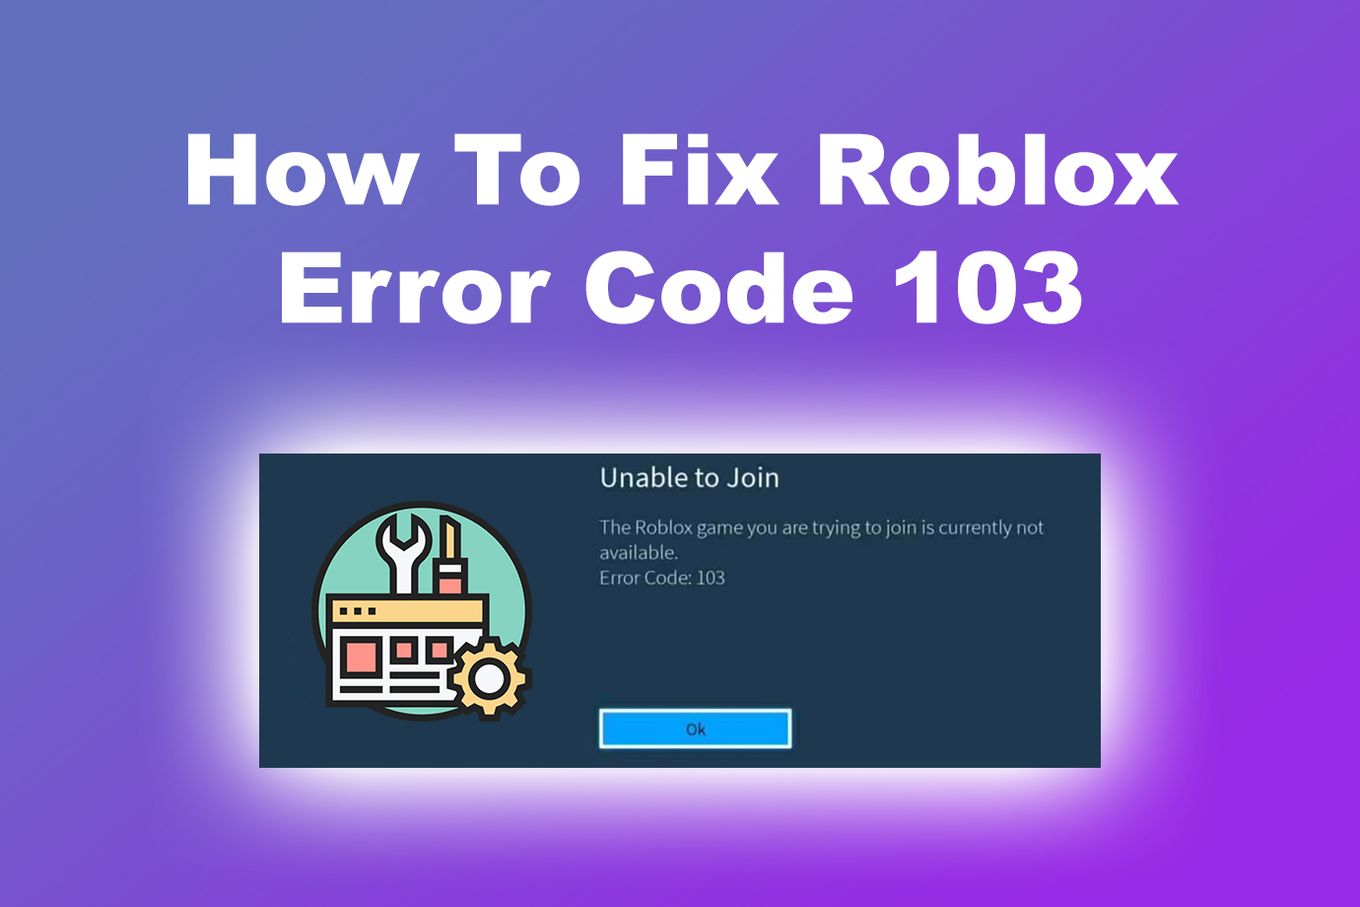 The download website that you were redirected to when you tried to play a  game when you did not have Roblox installed is still up with some very  minor changes! : r/roblox